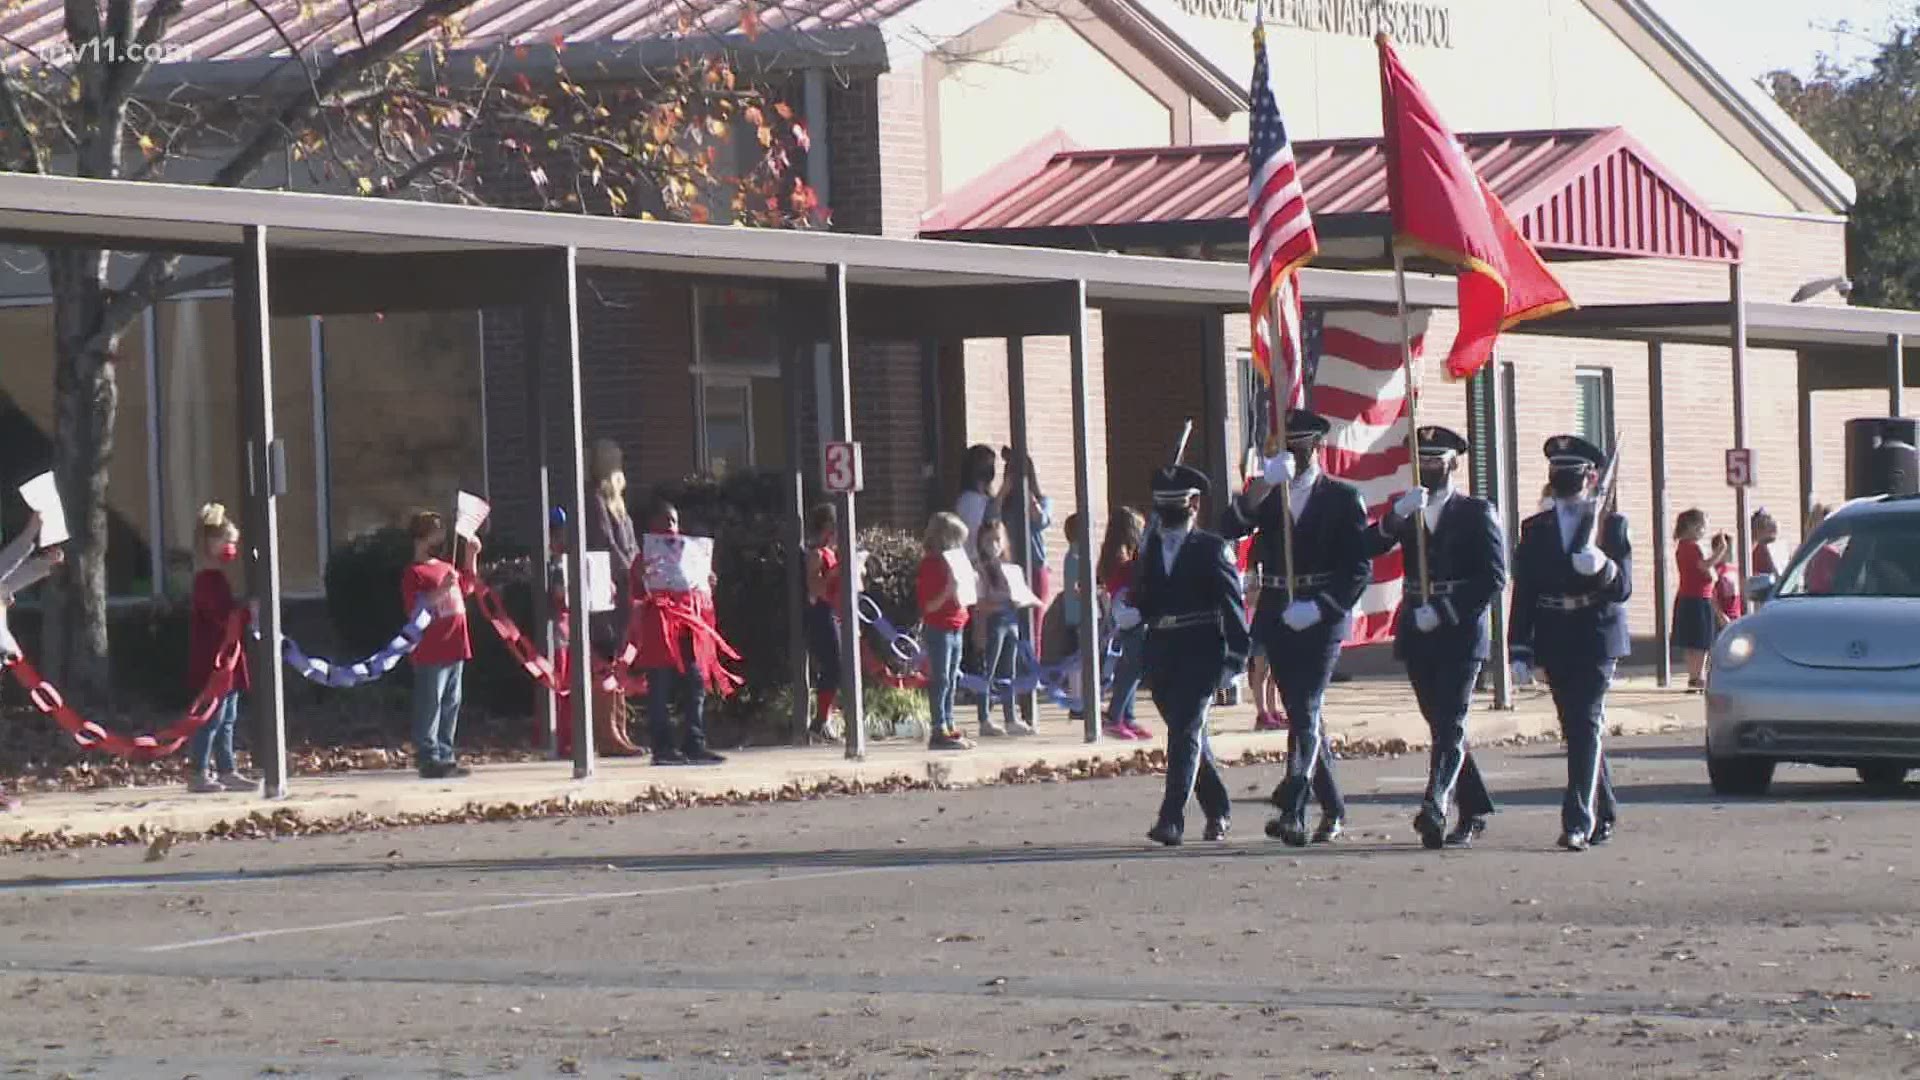 Cabot students held signs, waved, cheered - many even dressed in red, white, and blue - as veterans from the community drove by.